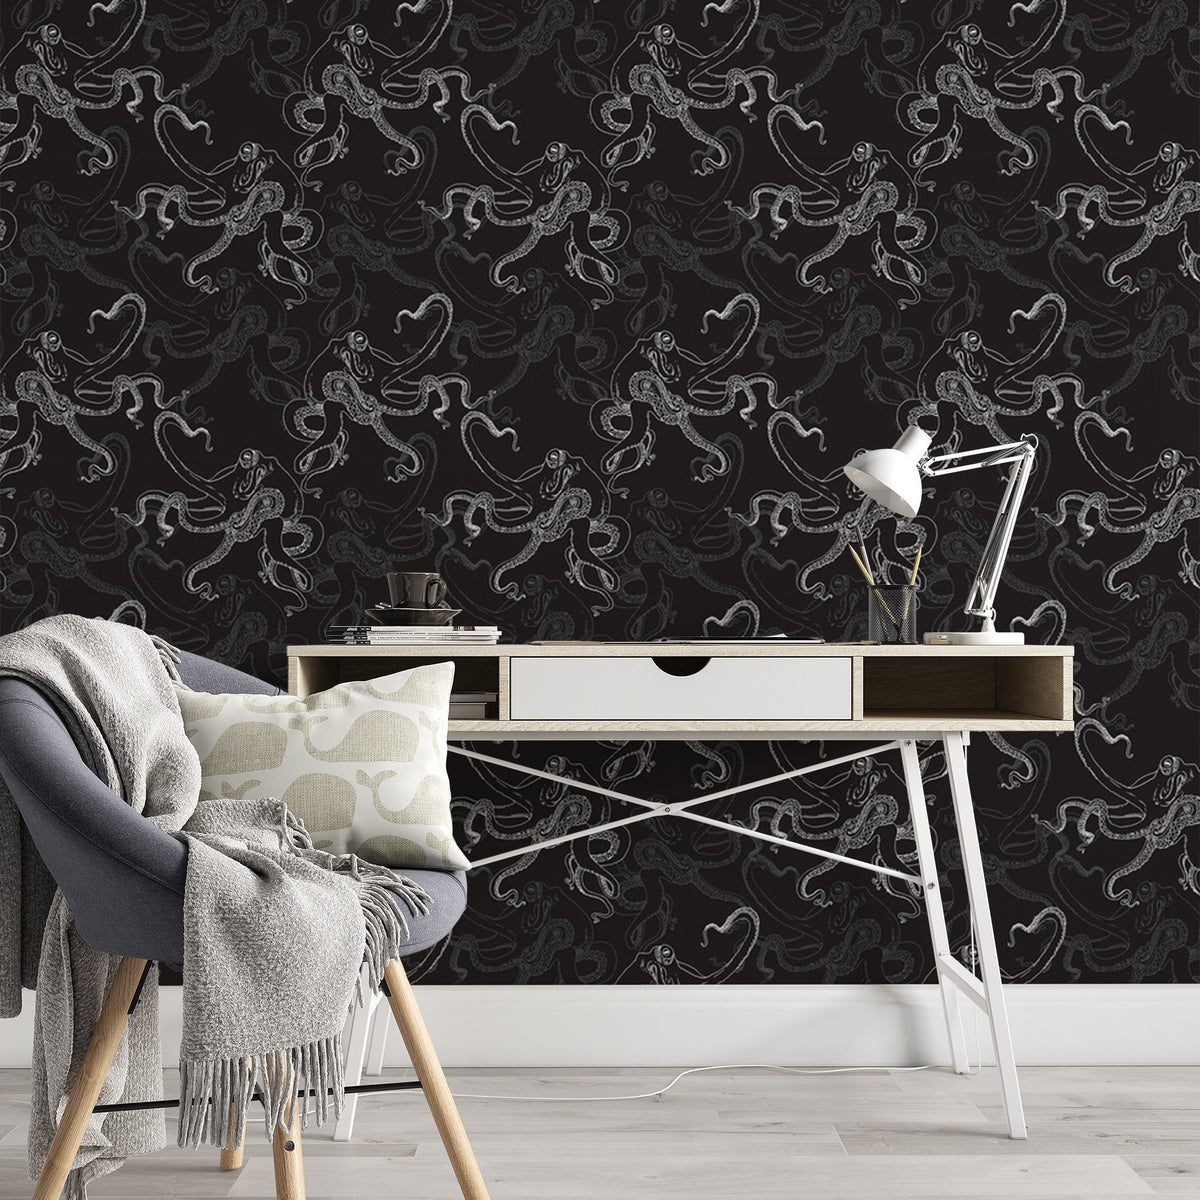 Octopus Pattern Removable Wallpaper